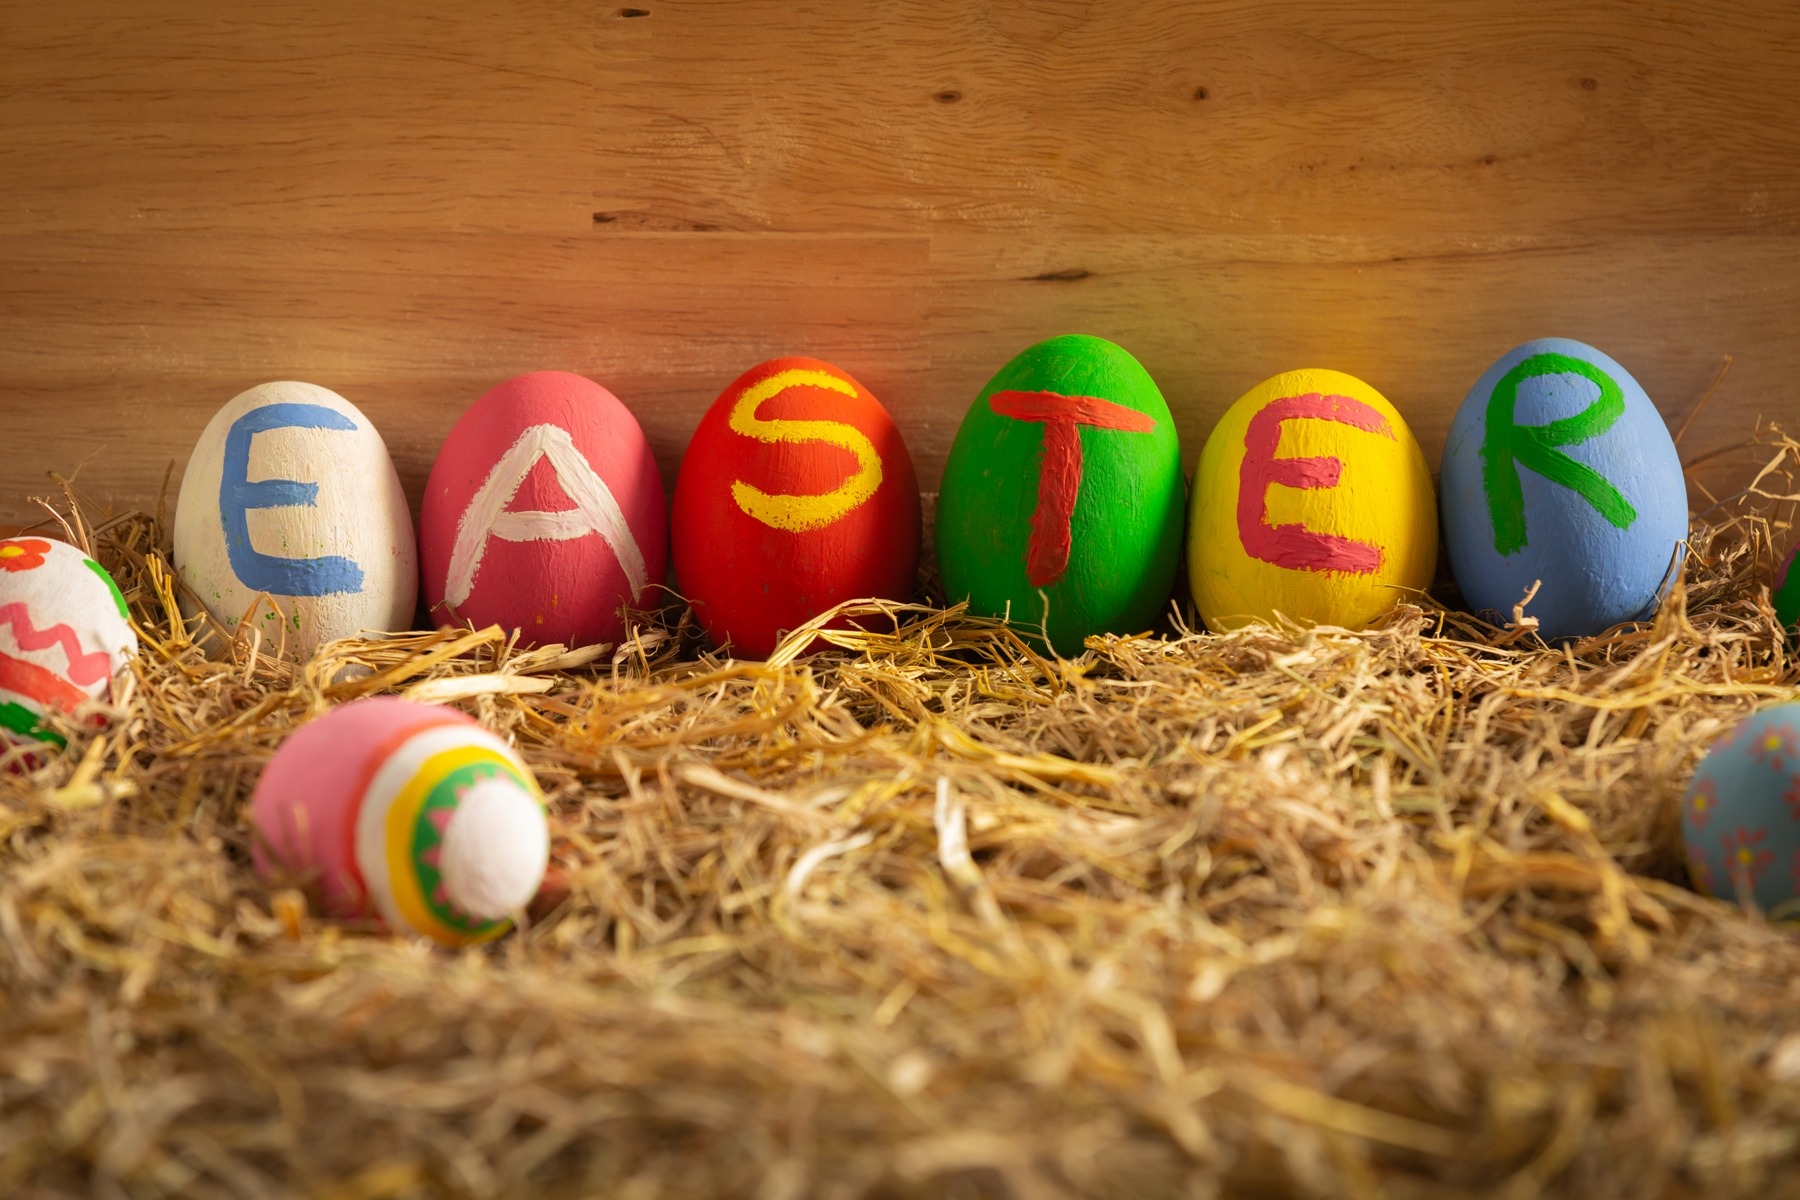 33 Easter Captions to make it memorable this Easter!